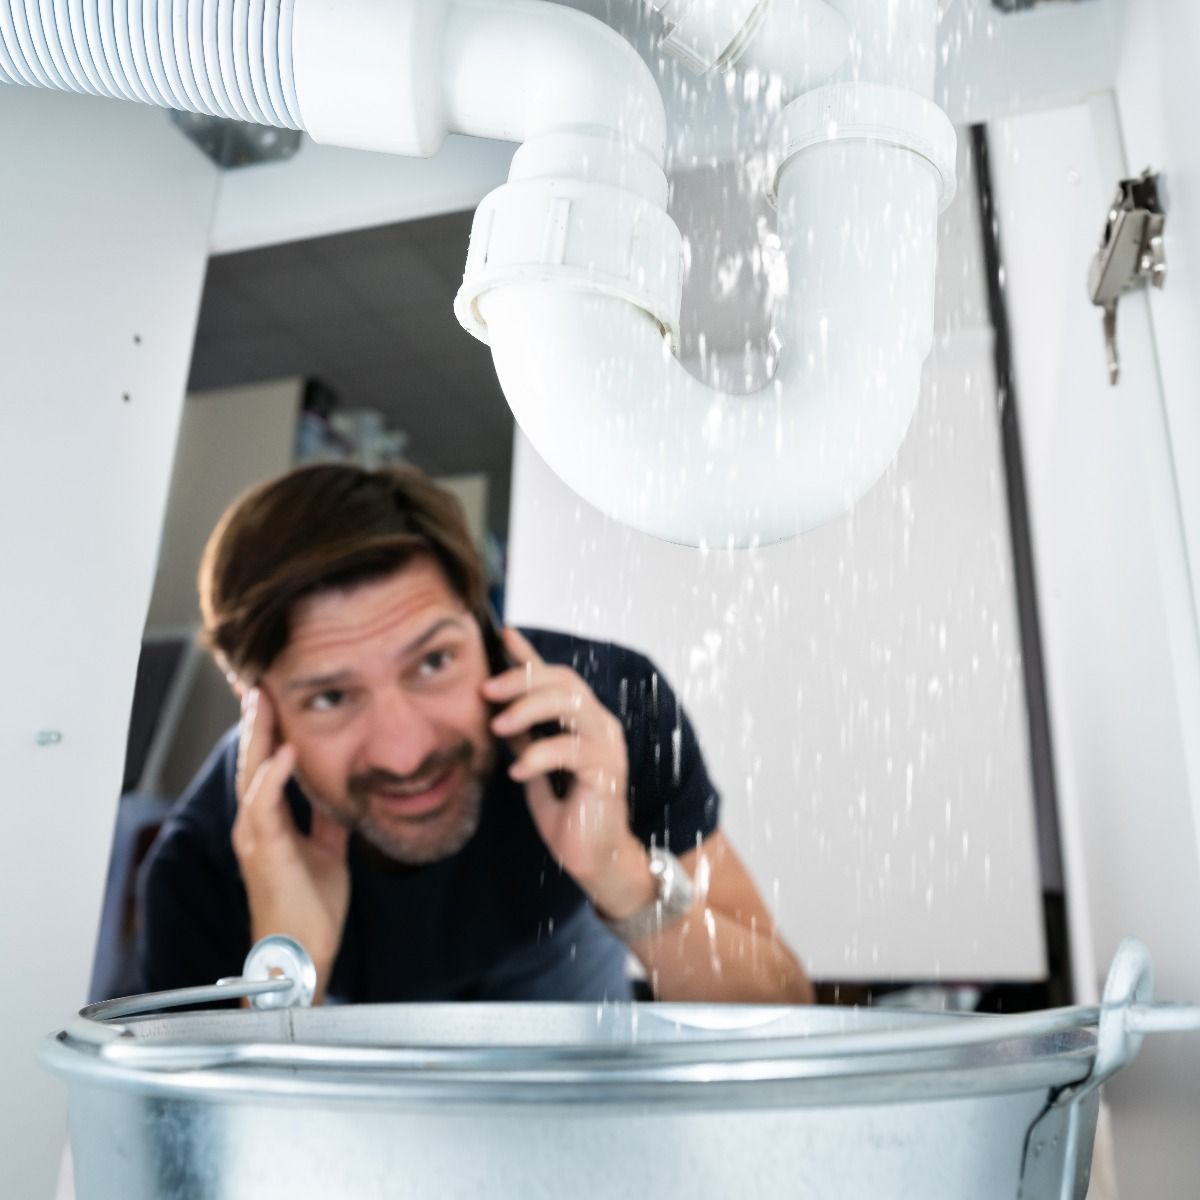 A man tensed on call due to plumbing issues